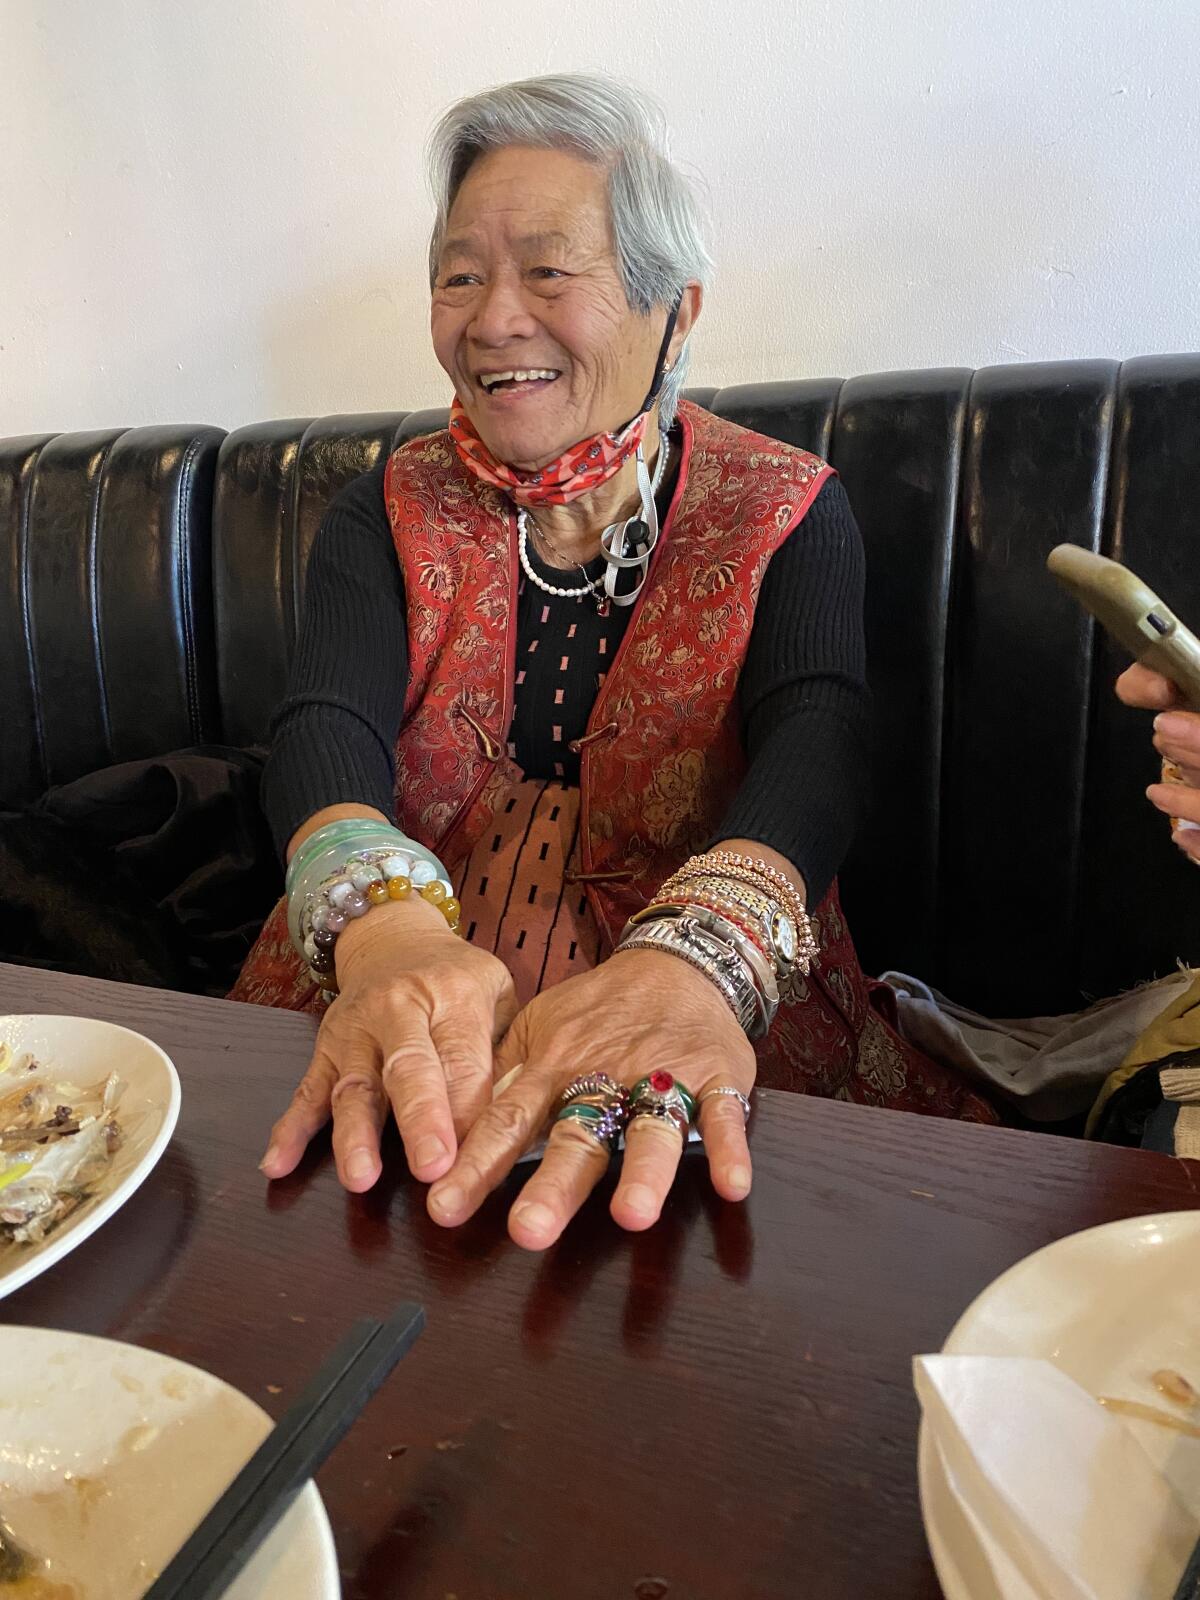 A smiling woman with multiple bracelets sits at a restaurant booth.